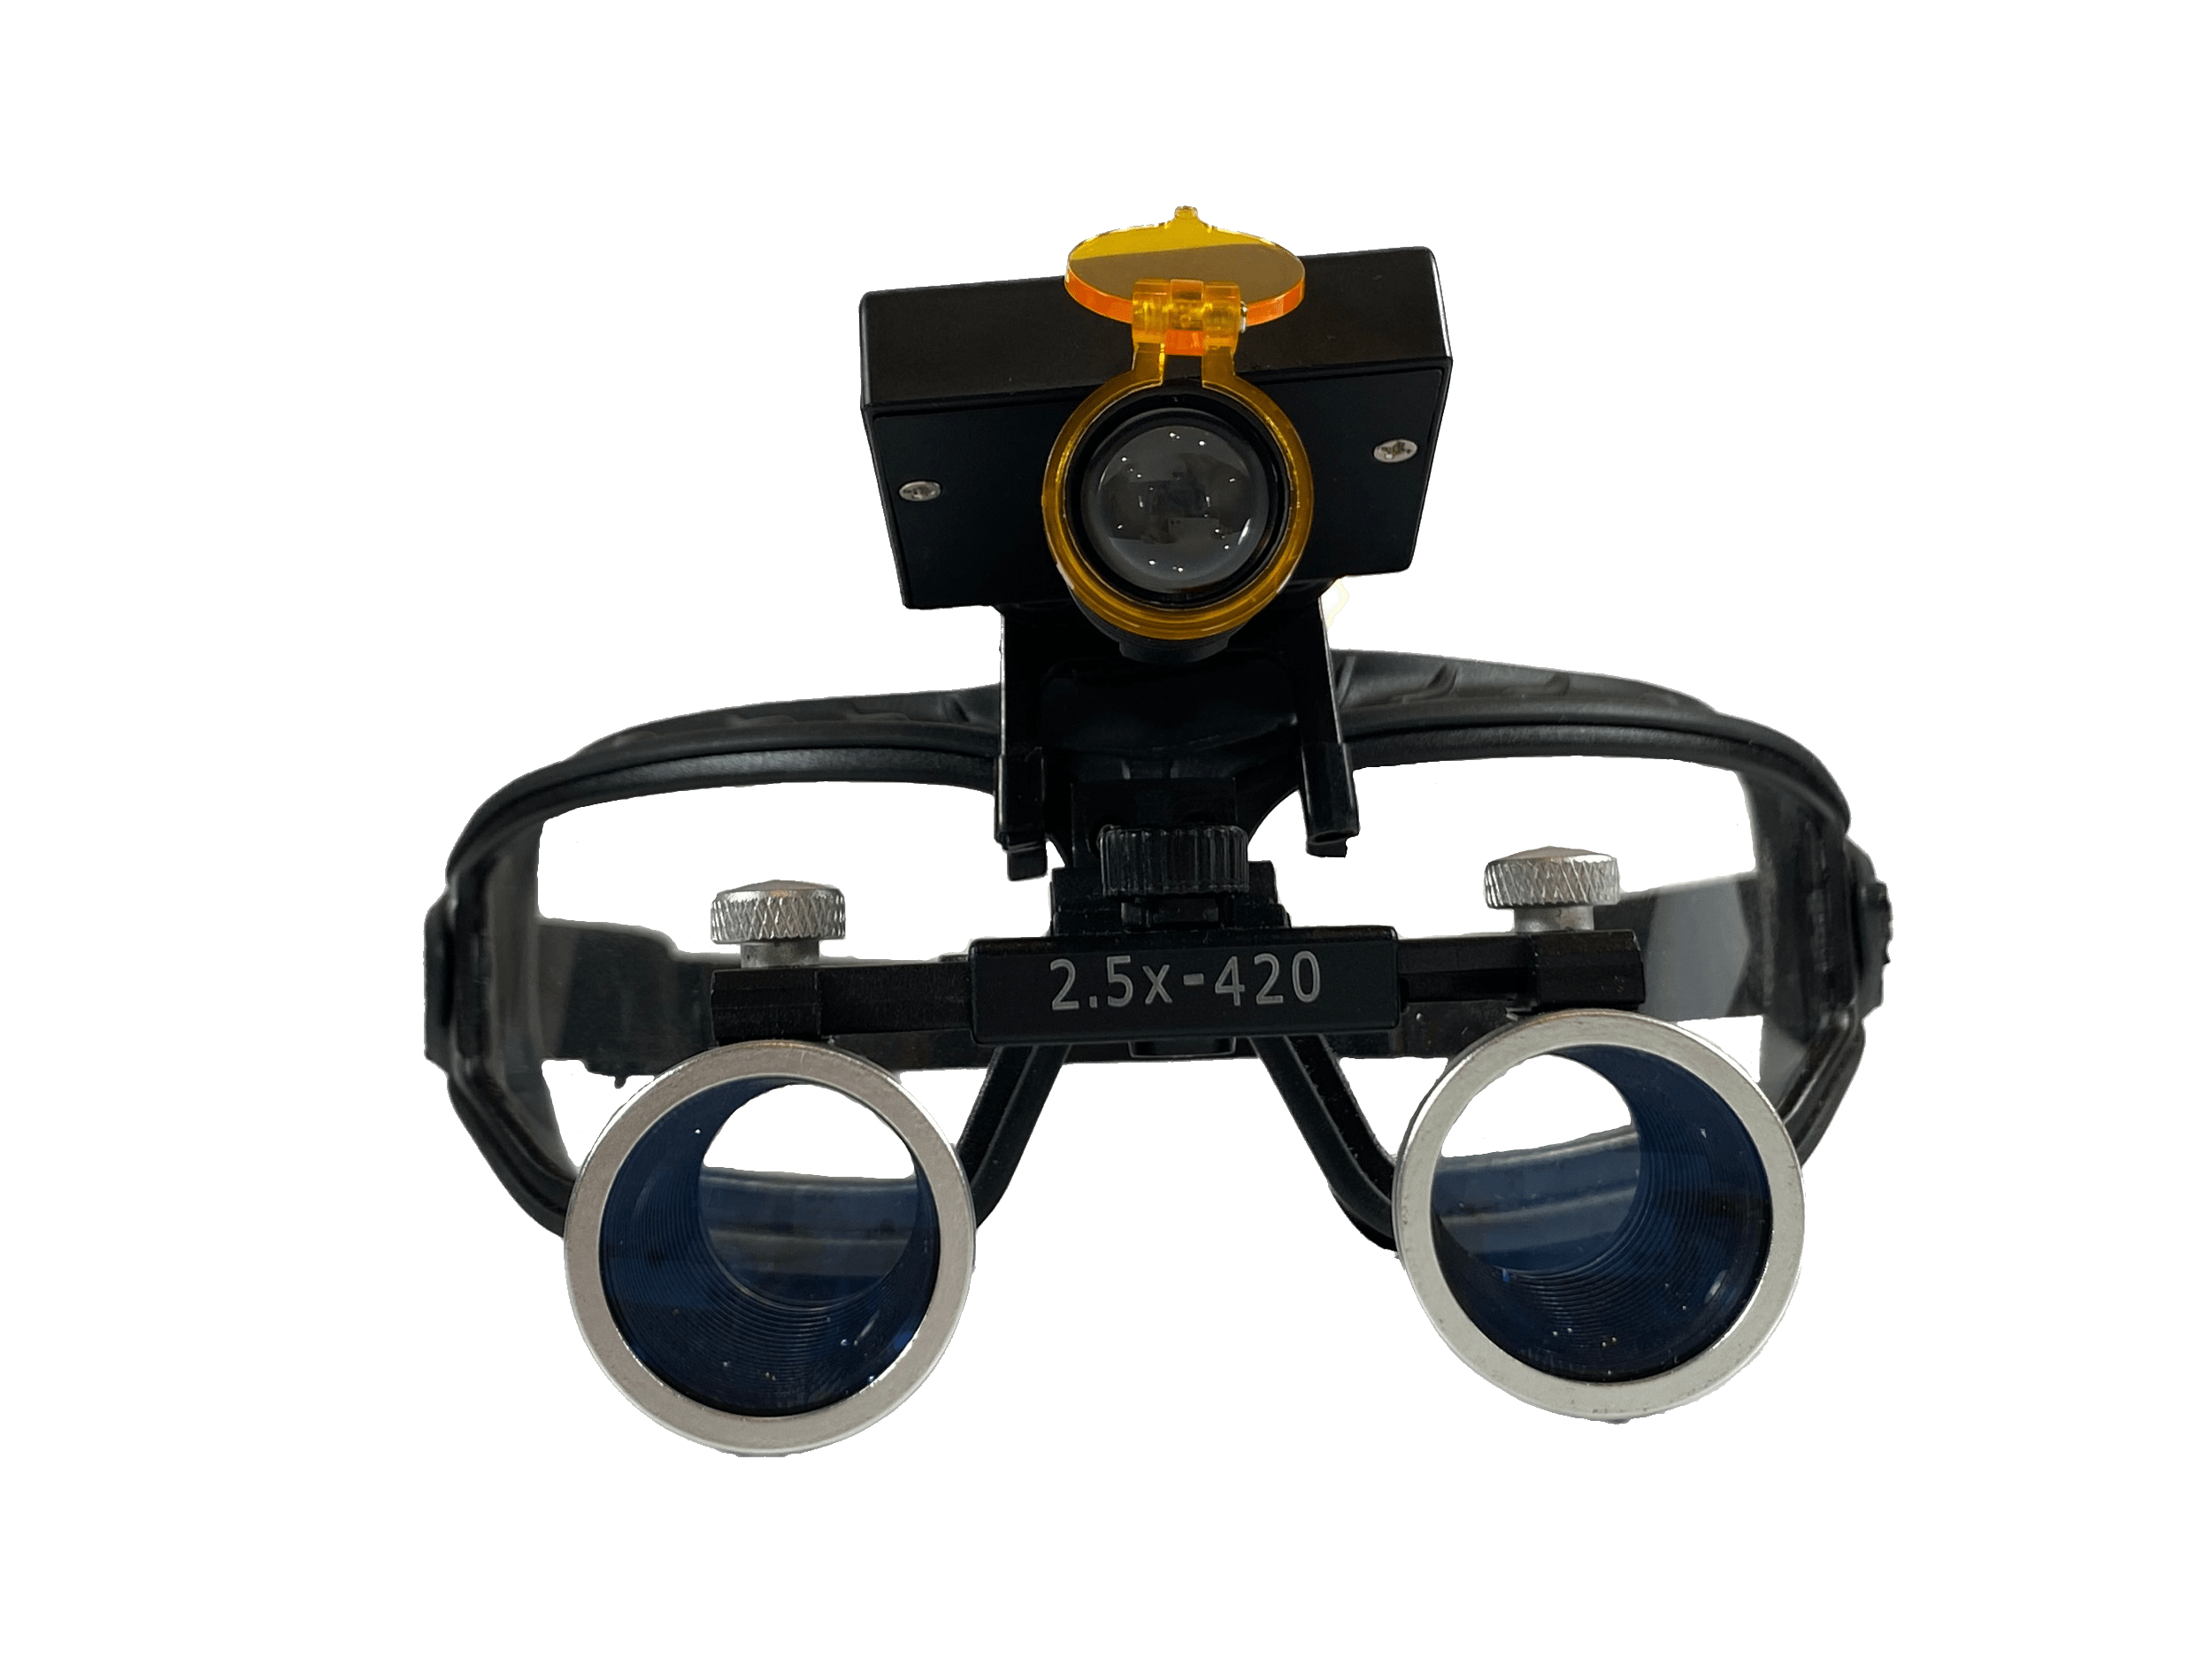 Dental Loupe Surgical Medical Binocular Loupes Frame Loupe， have 2.5X and  3.5X for choose